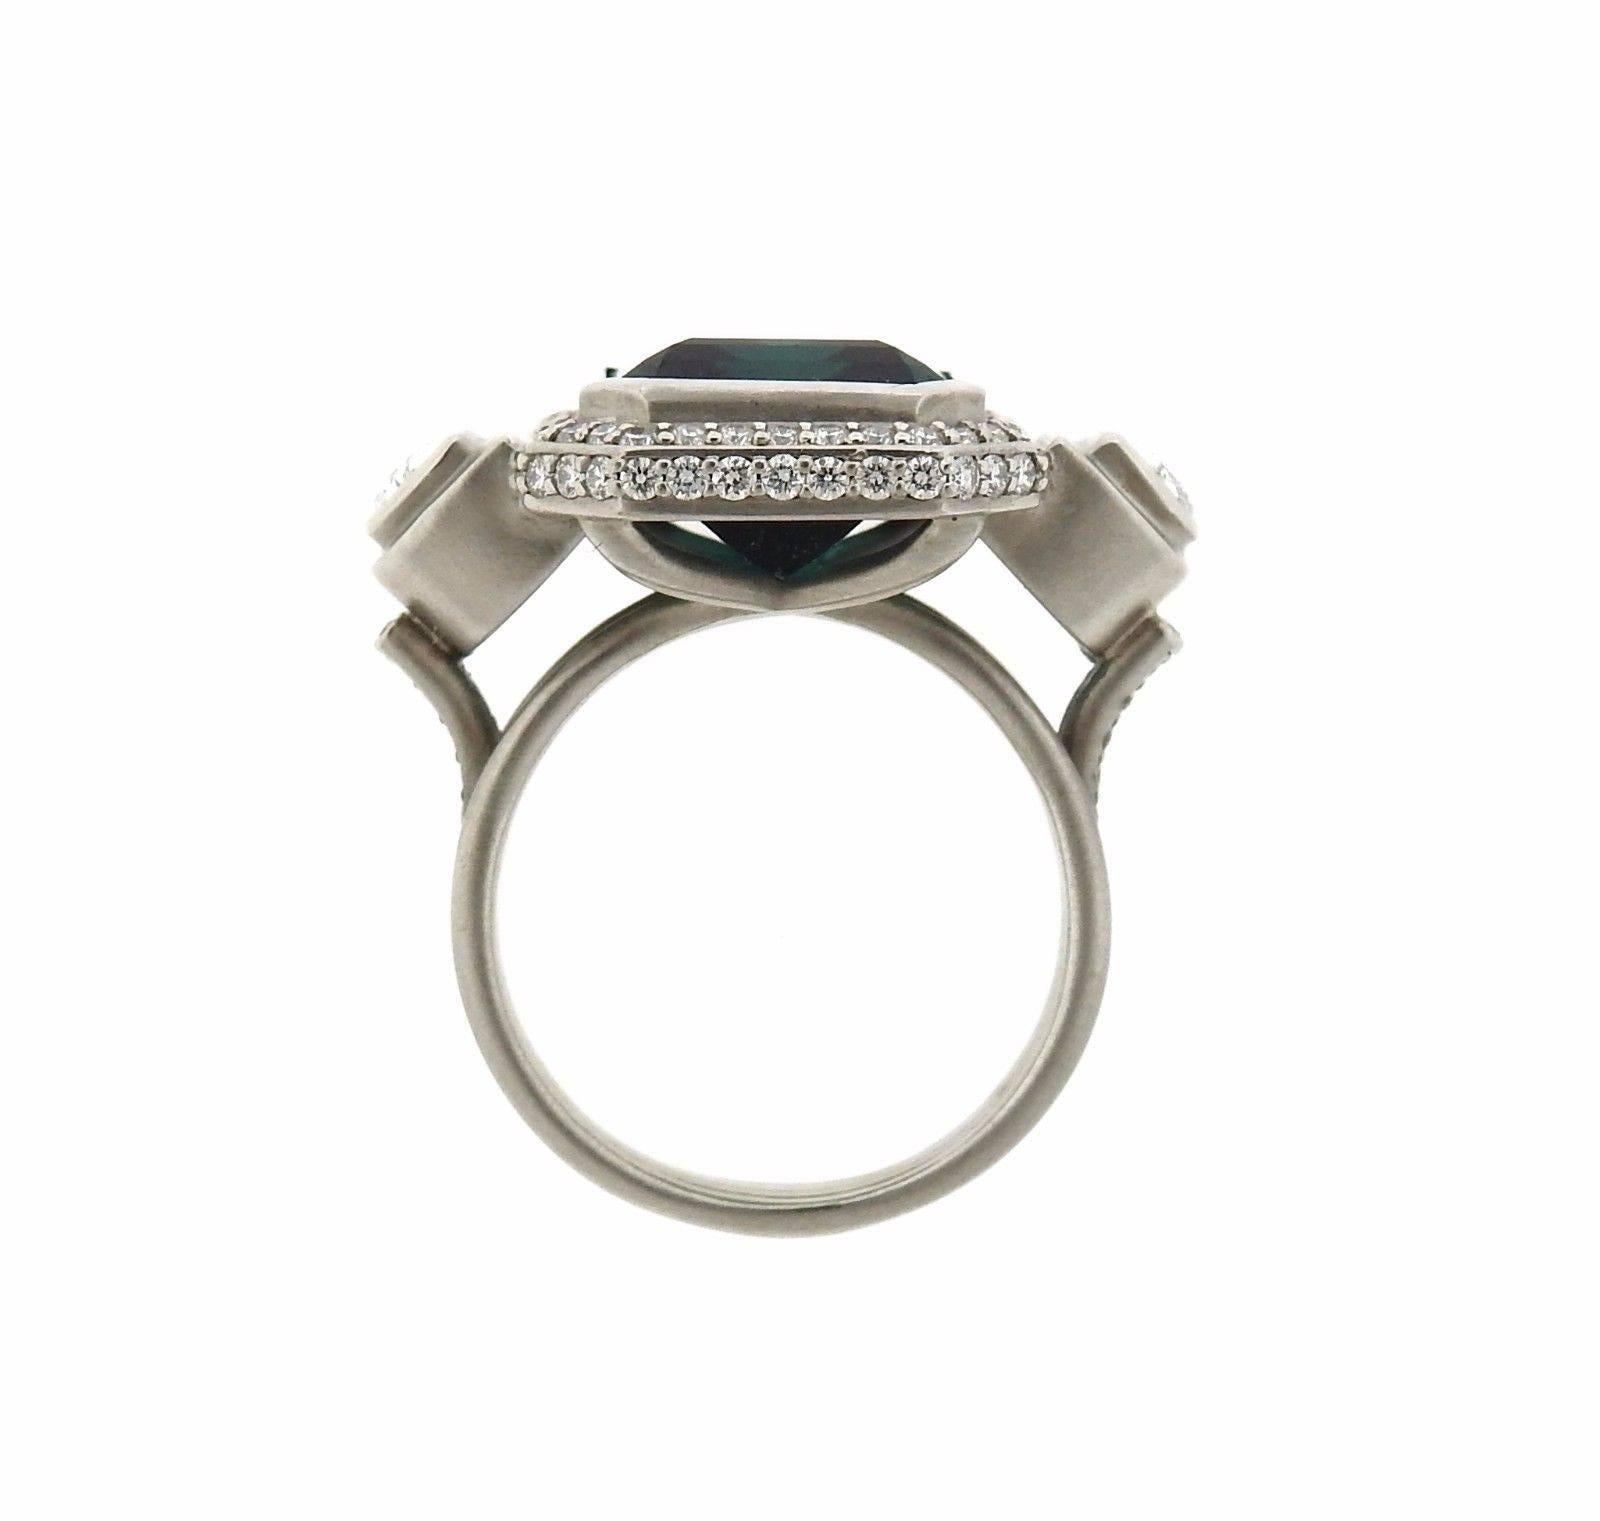 An 18k white gold ring set with a 10.80ct blue green Indicolite and approximately 1.65ctw of G/VS1 Diamonds.  The ring is a size 8. Ring top is 27mm x 19.5mm at widest point.  The weight of the ring is 16.9 grams.  Marked: 18K Sam Lehr.  Comes with